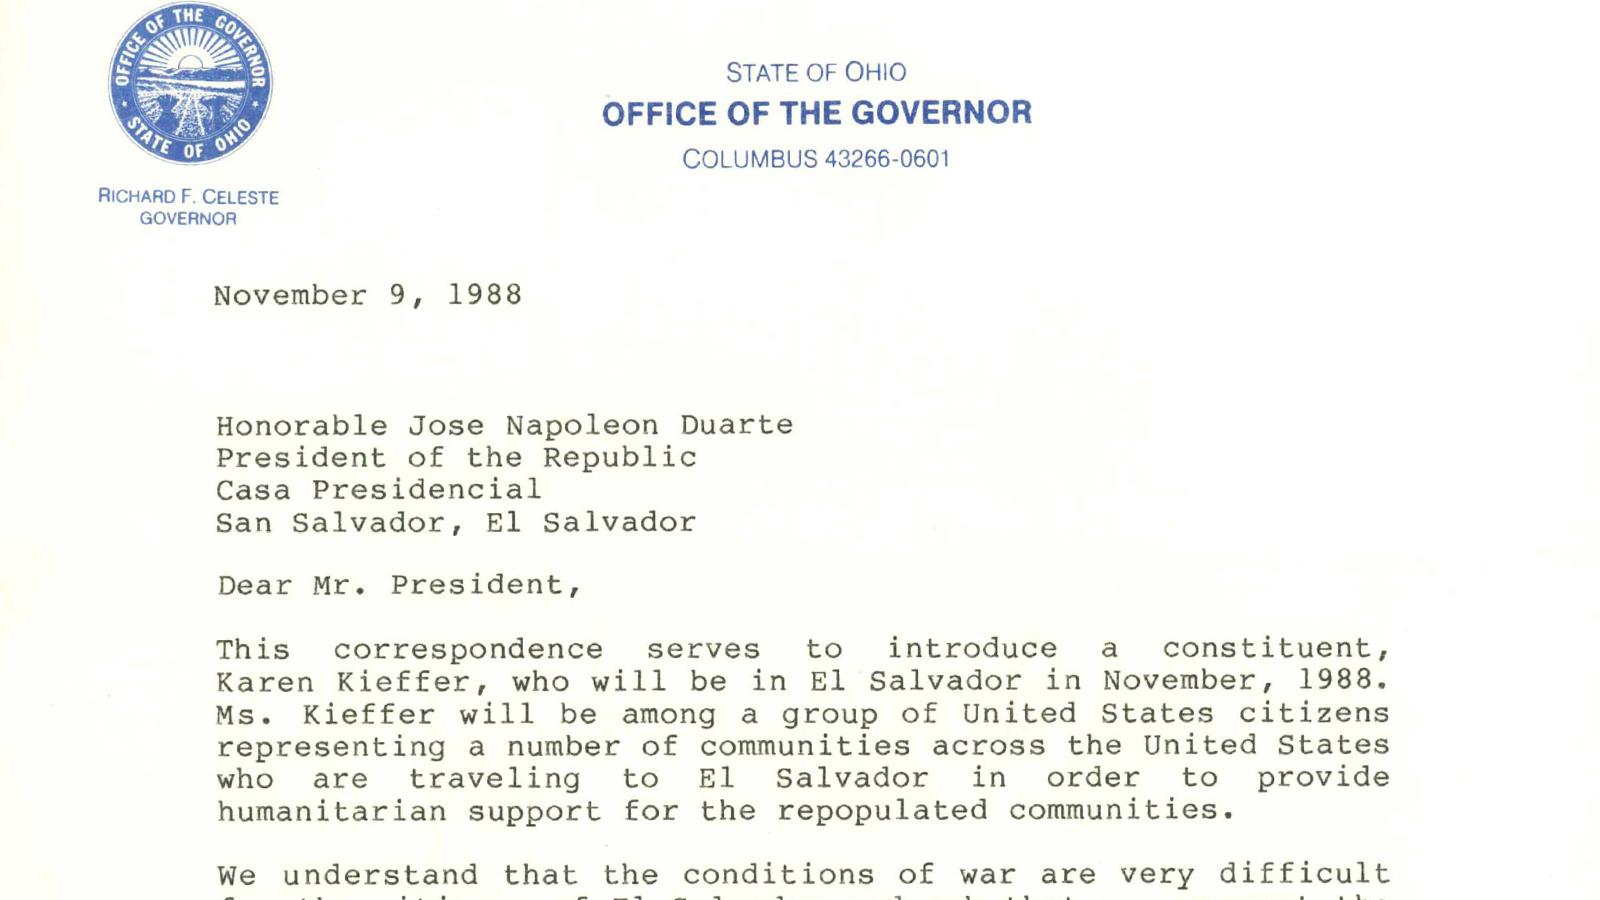 1988 Letter from the Governor of Ohio